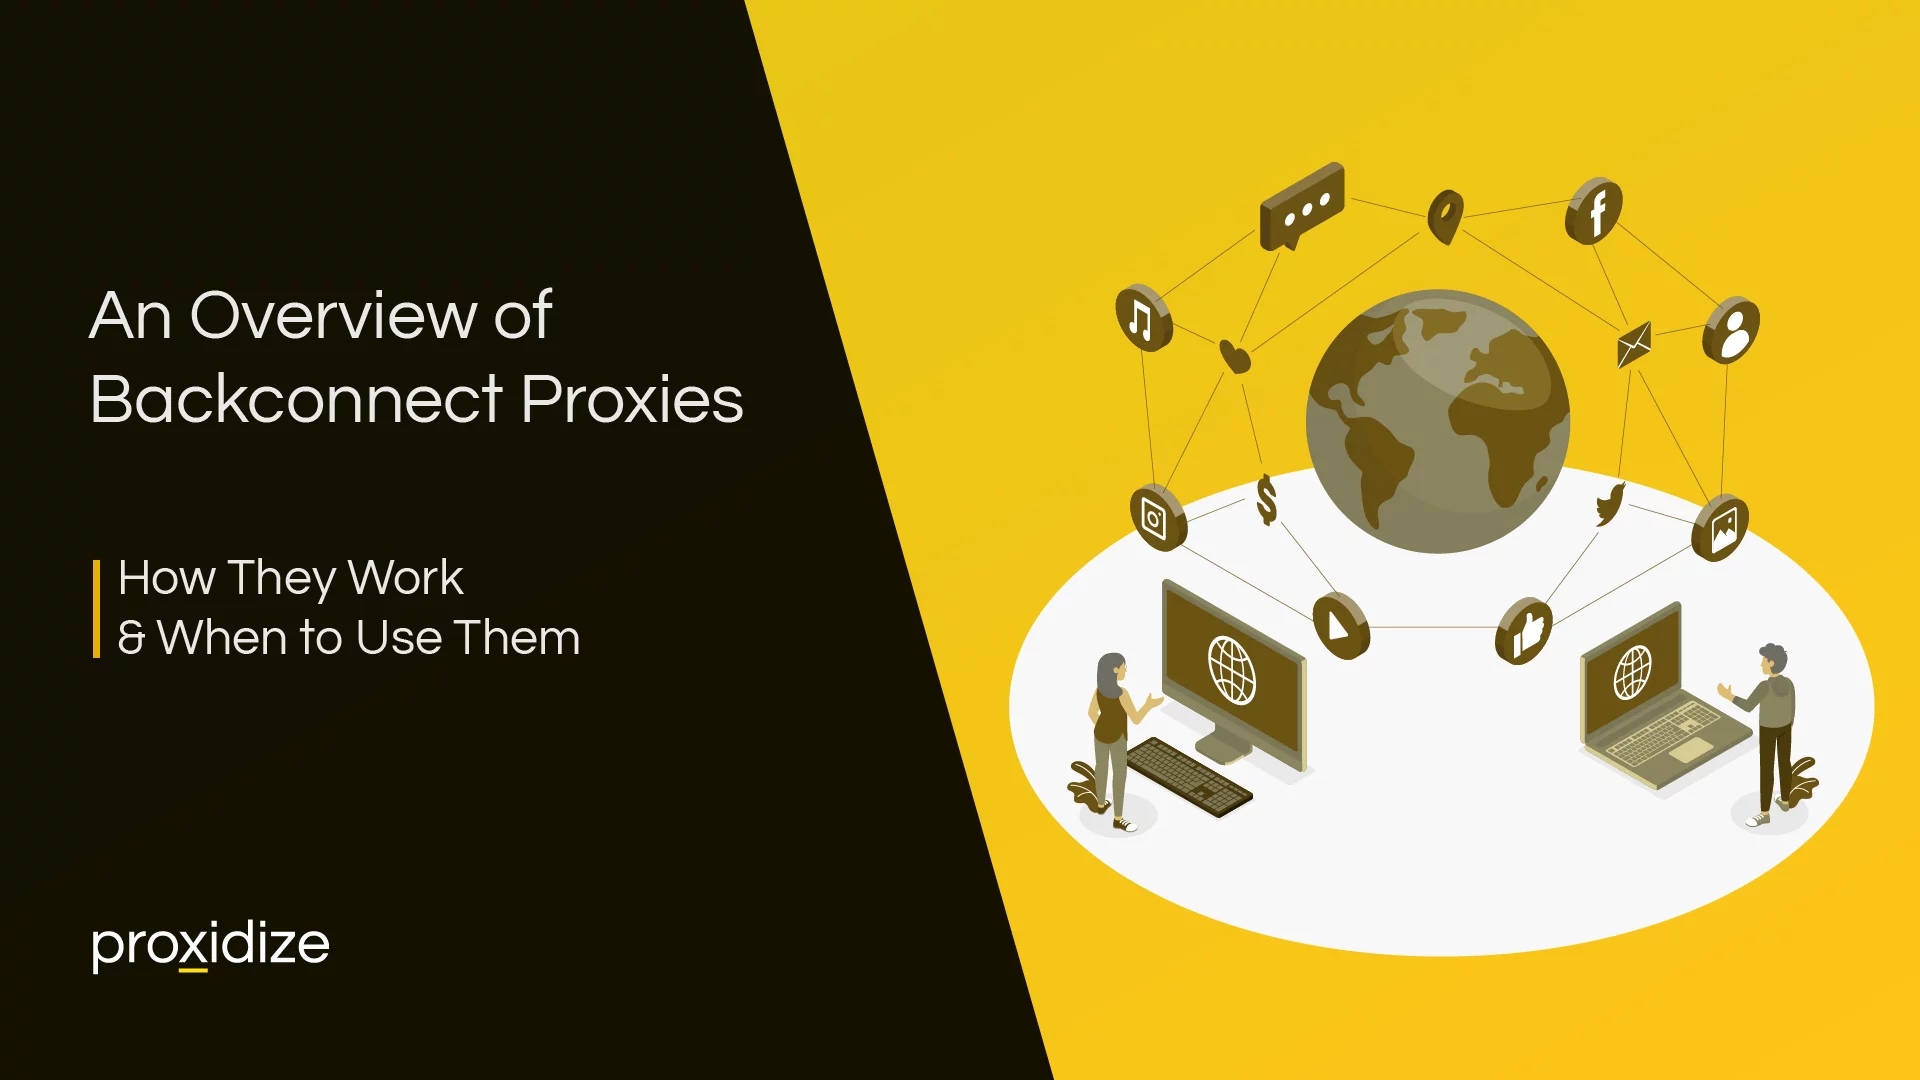 An Overview of Backconnect Proxies